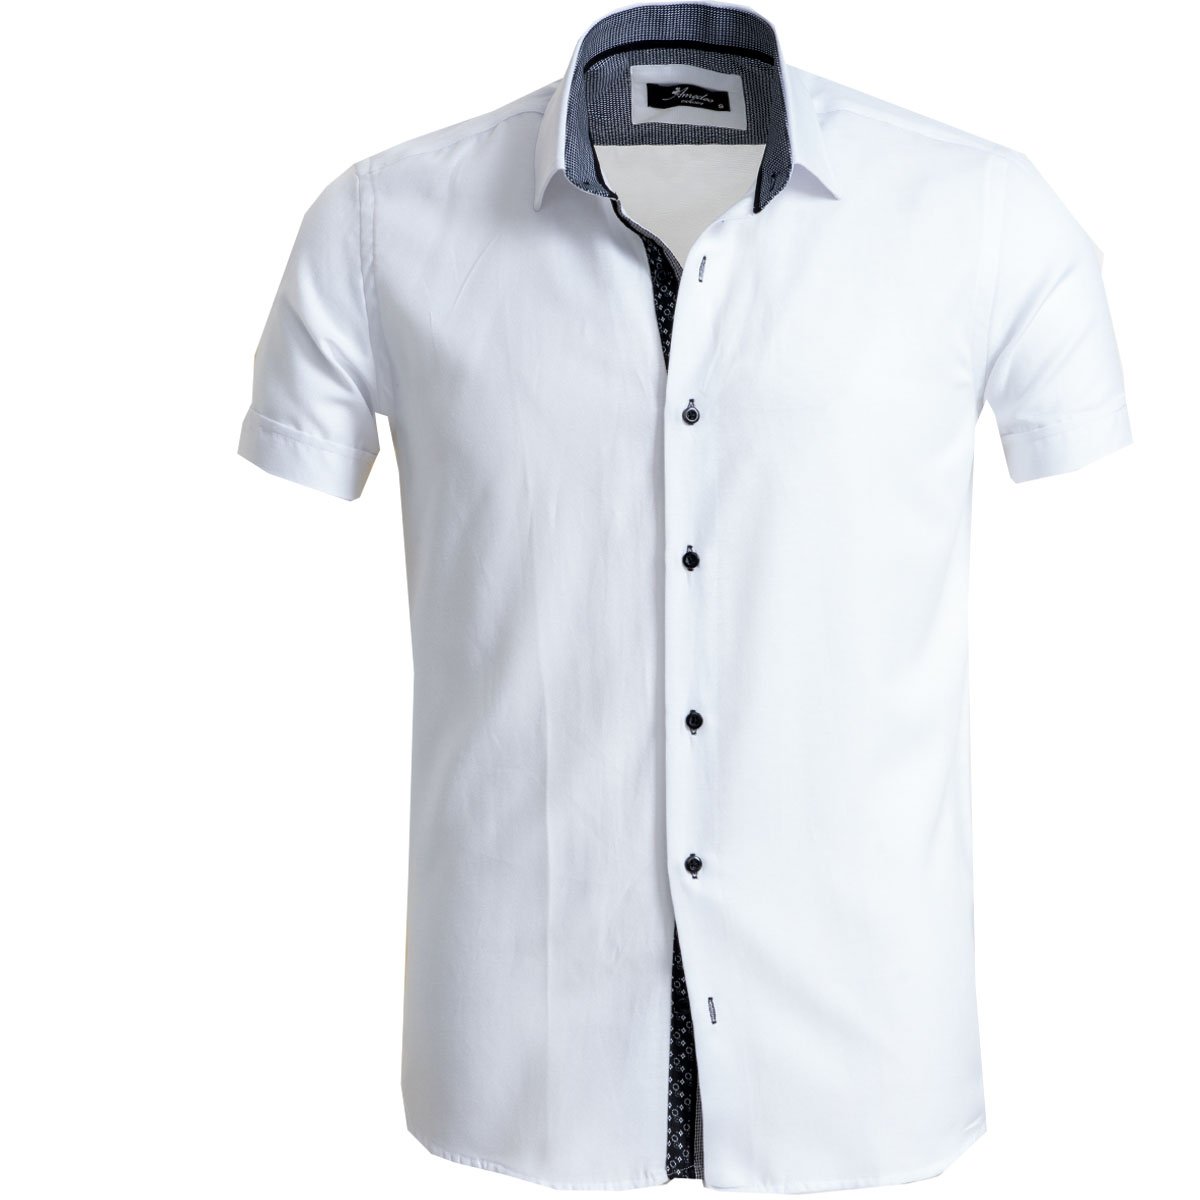 Solid White Mens Short Sleeve Button Up Shirts Tailored Slim Fit Amedeo Exclusive